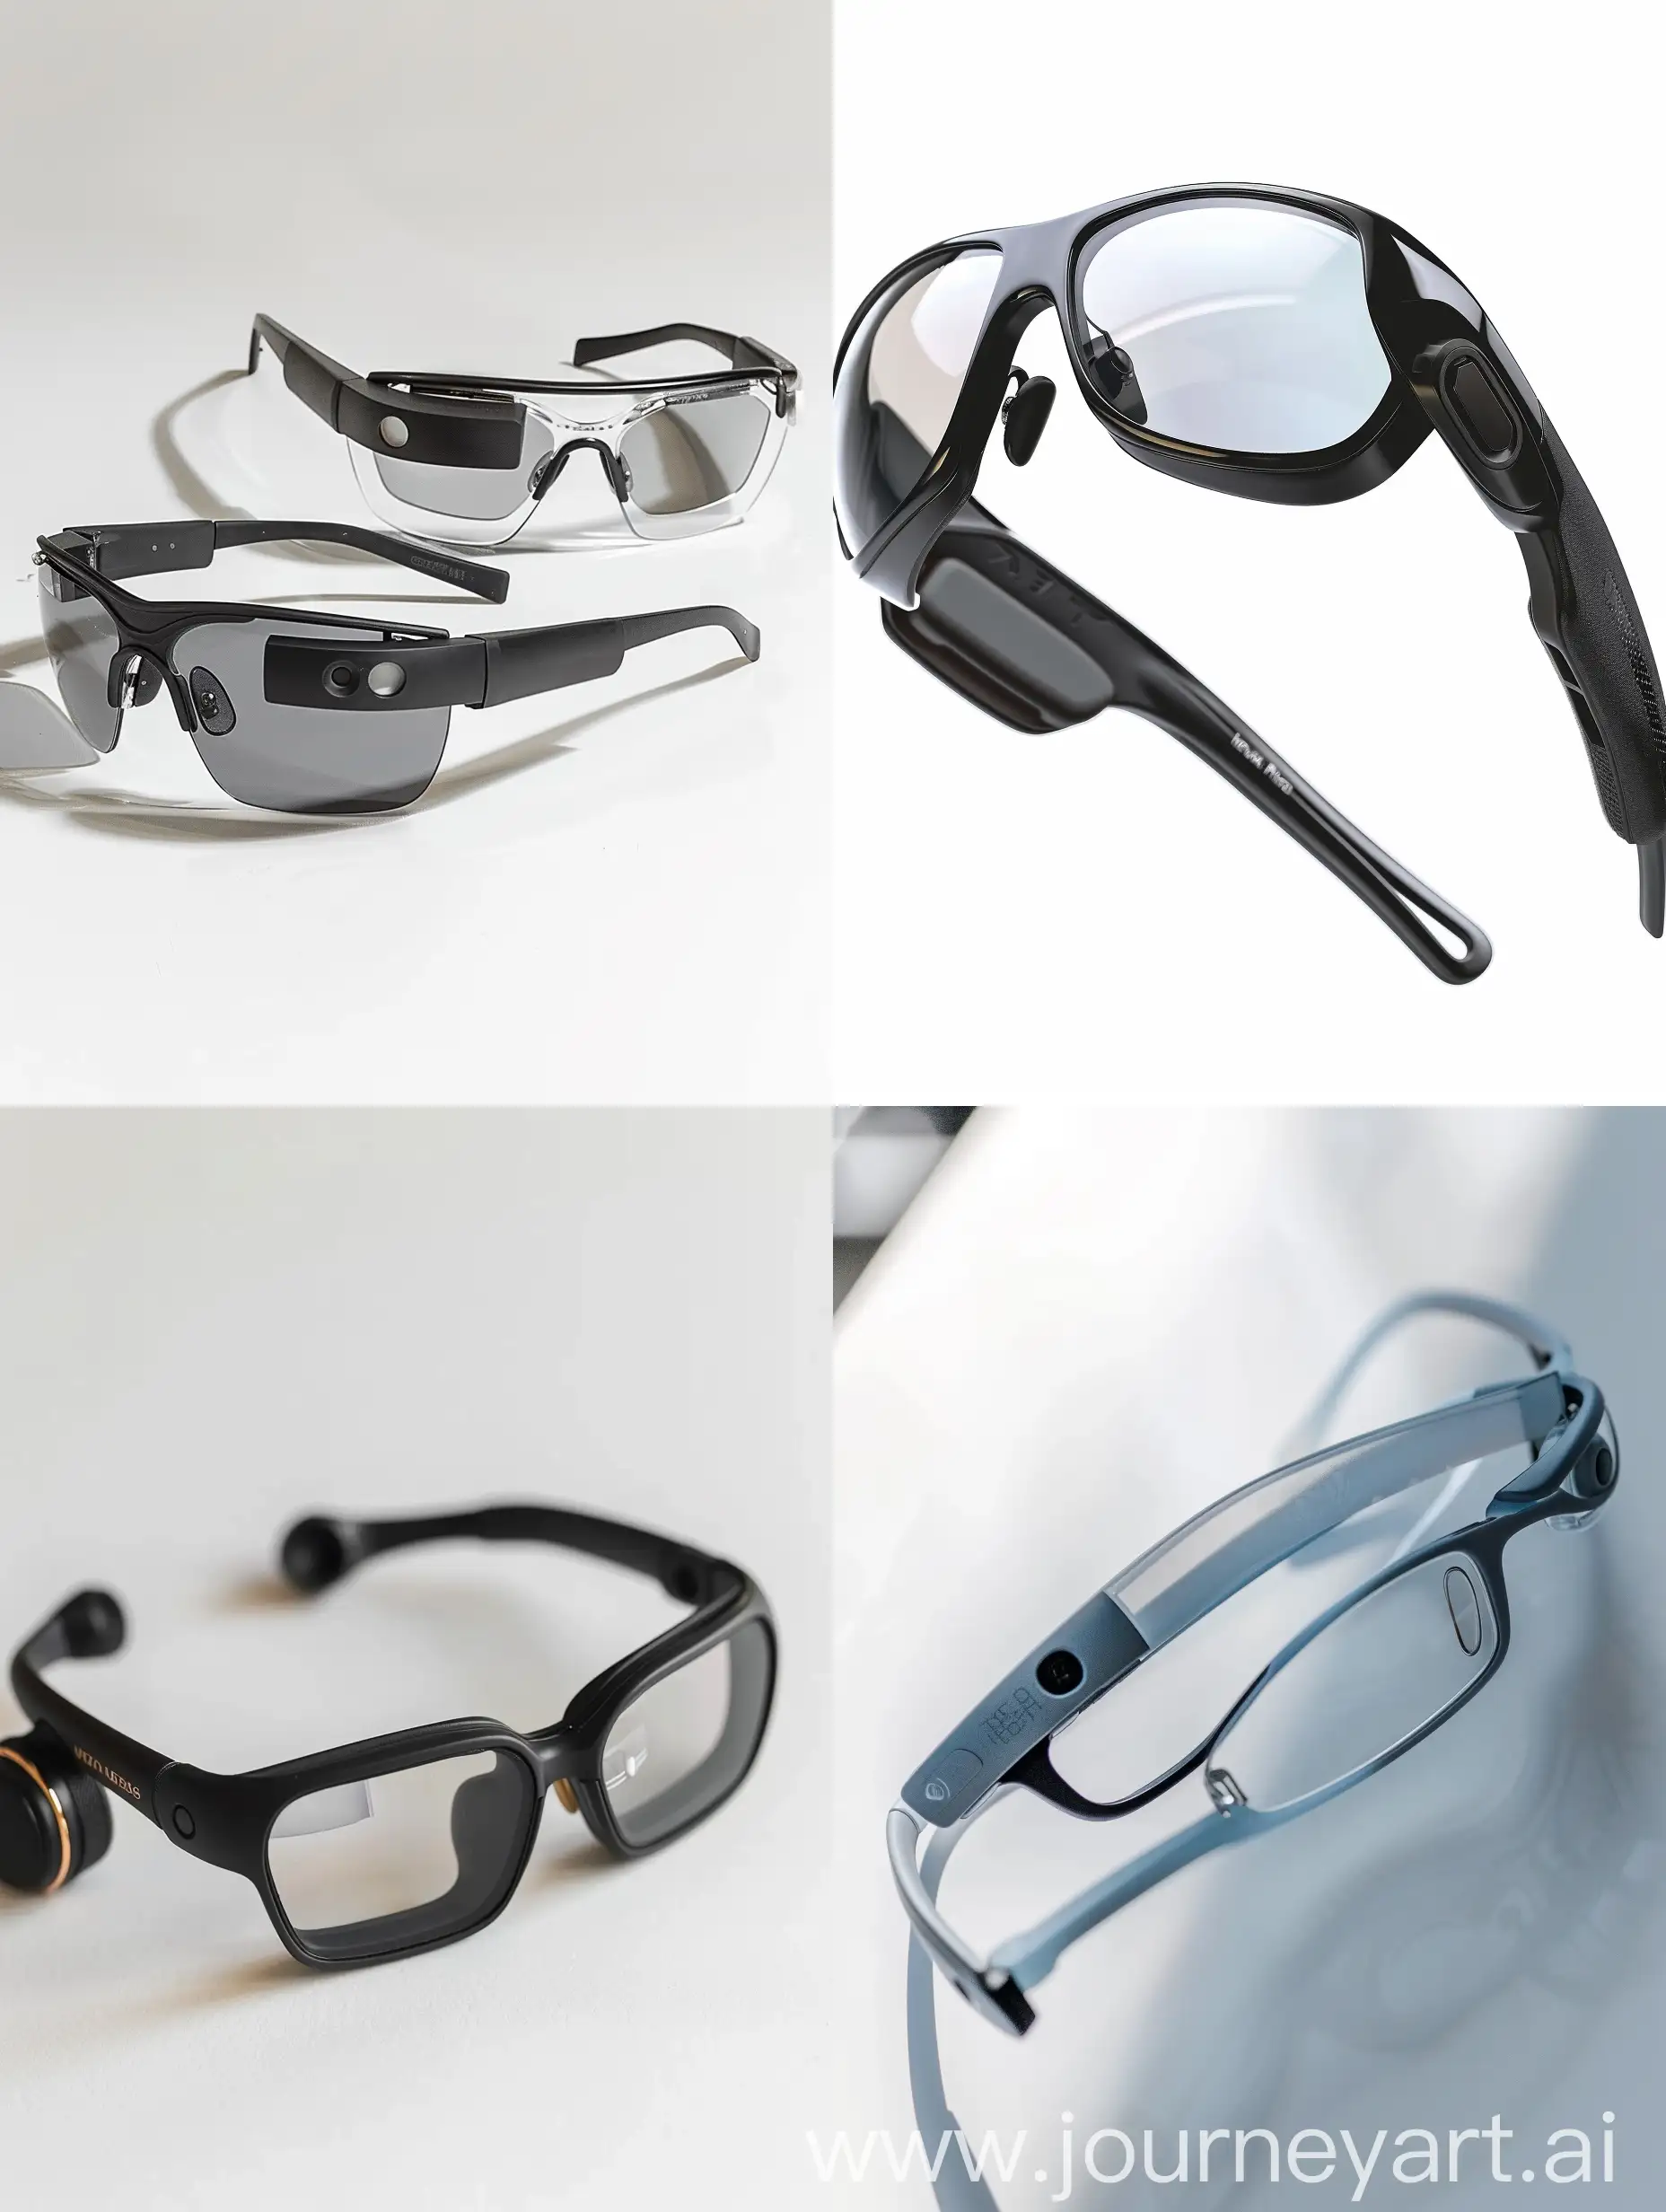 Glasses combined with handsfree